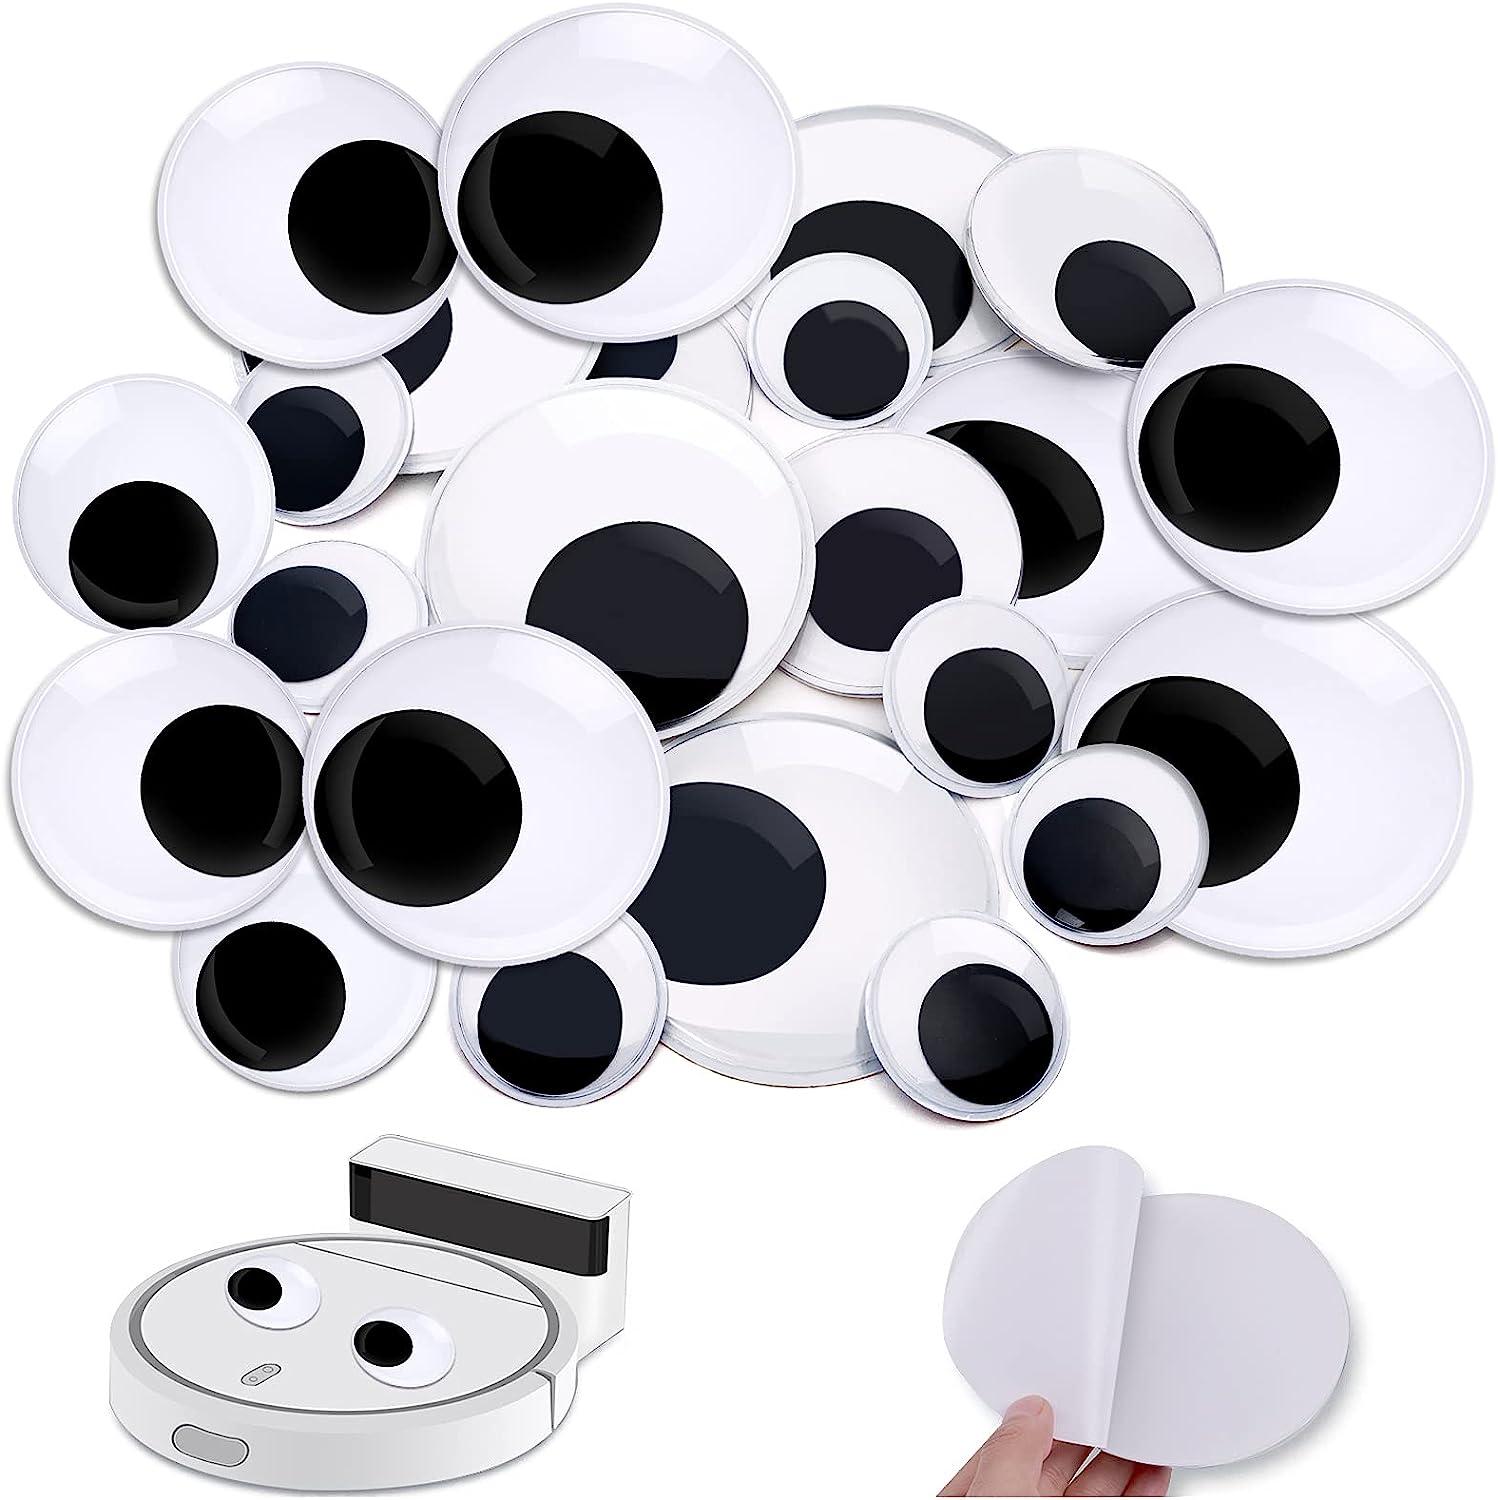  16 Pieces 6 Inch Giant Googly Eyes Halloween Plastic Wiggle  Eyes Large Sized Wiggle Eyes with Self Adhesive for DIY Art Crafts  Christmas Tree Party Decorations